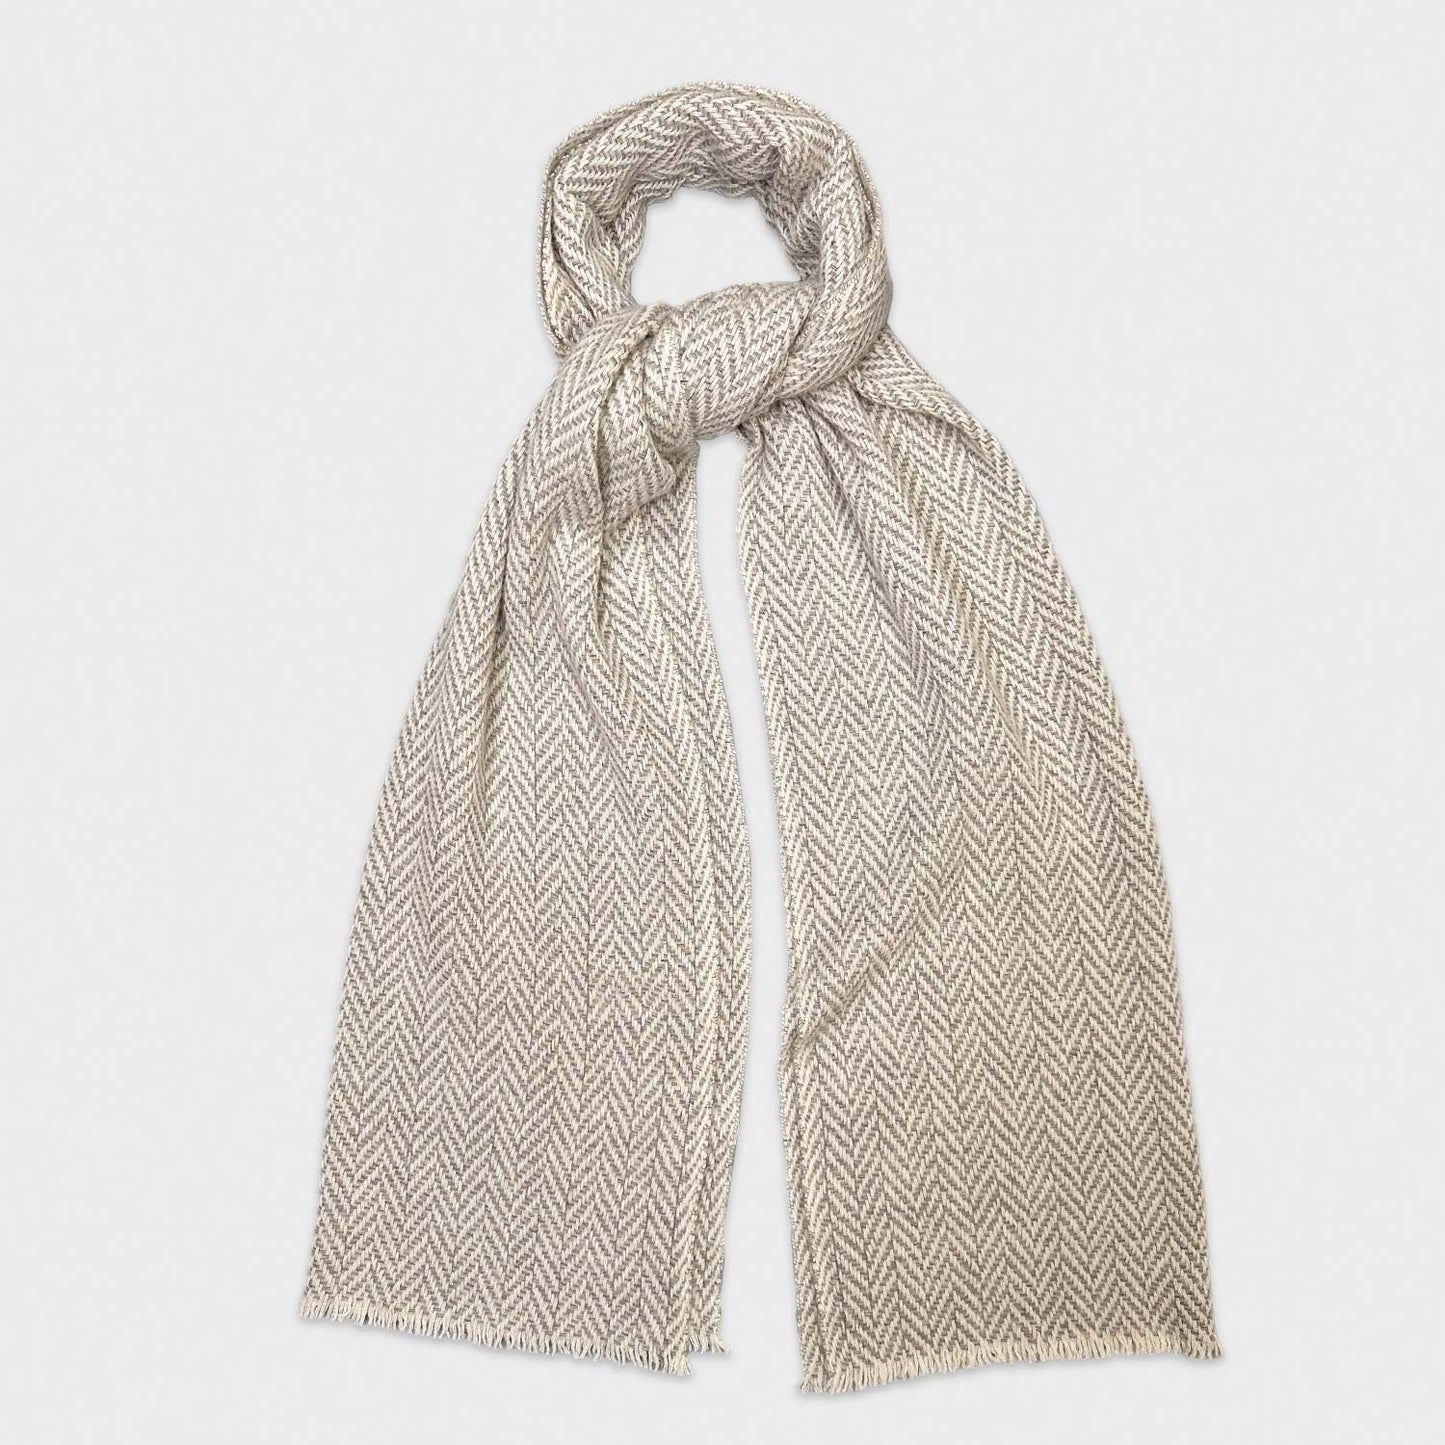 Beige Herringbone Cashmere Scarf 19 andrea's 47. Soft cashmere shawl, iconic herringbone scarf ideal as a unisex scarf or cashmere shrug, made in Italy by 19 Andrea's 47 for Wools Boutique Uomo, beige and ivory white color